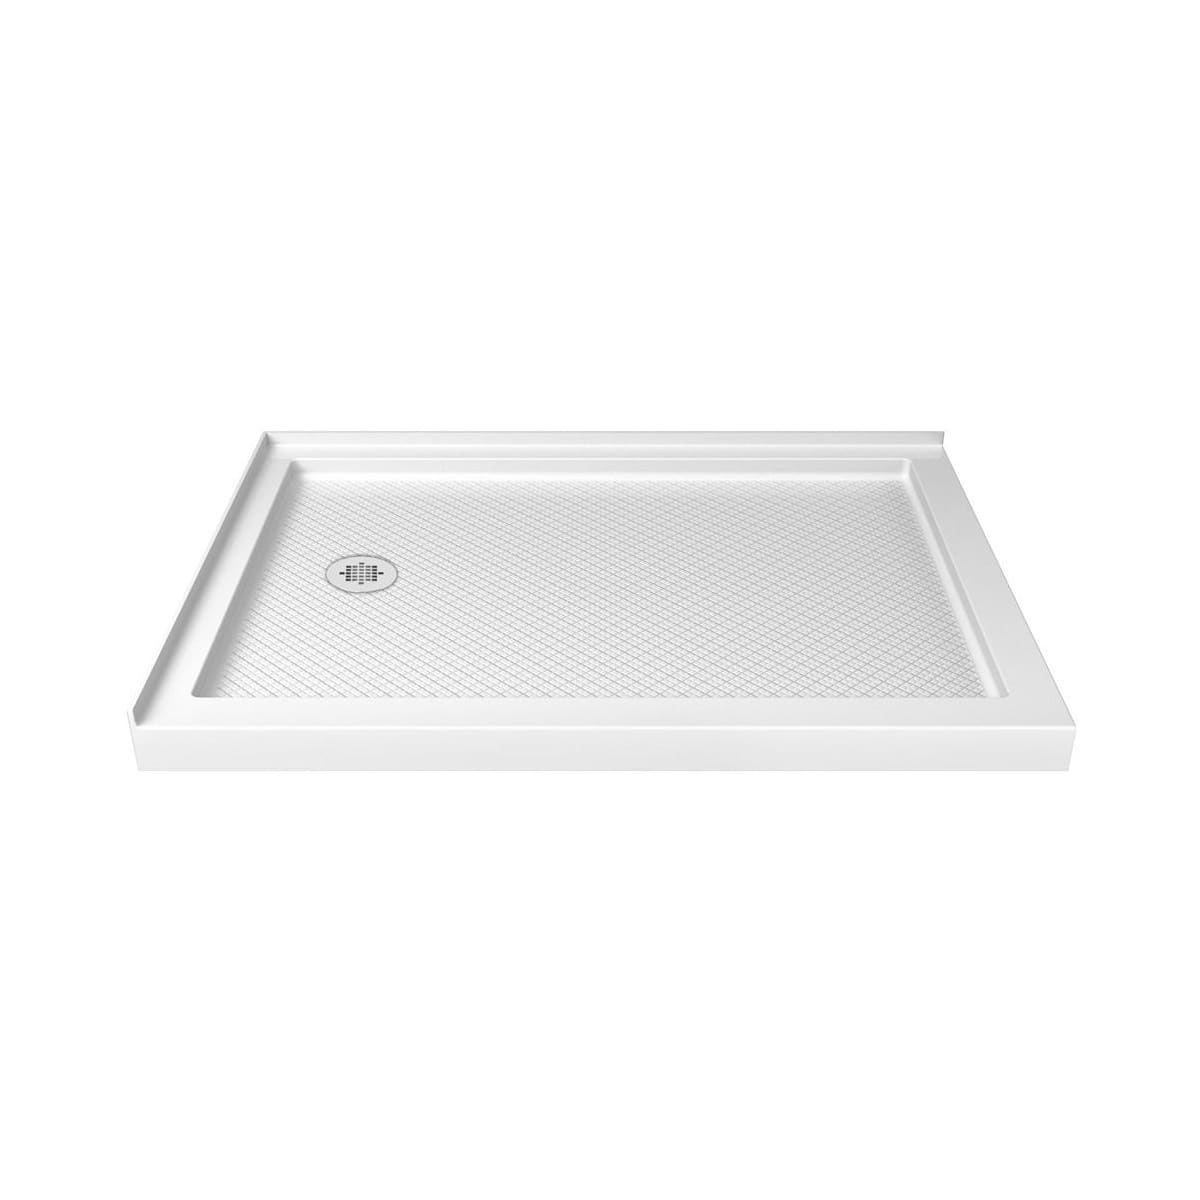 Tileon 36 in. x 36 in. Shower Base White, Centered Drain and Single-Threshold, Shower Caddy in White